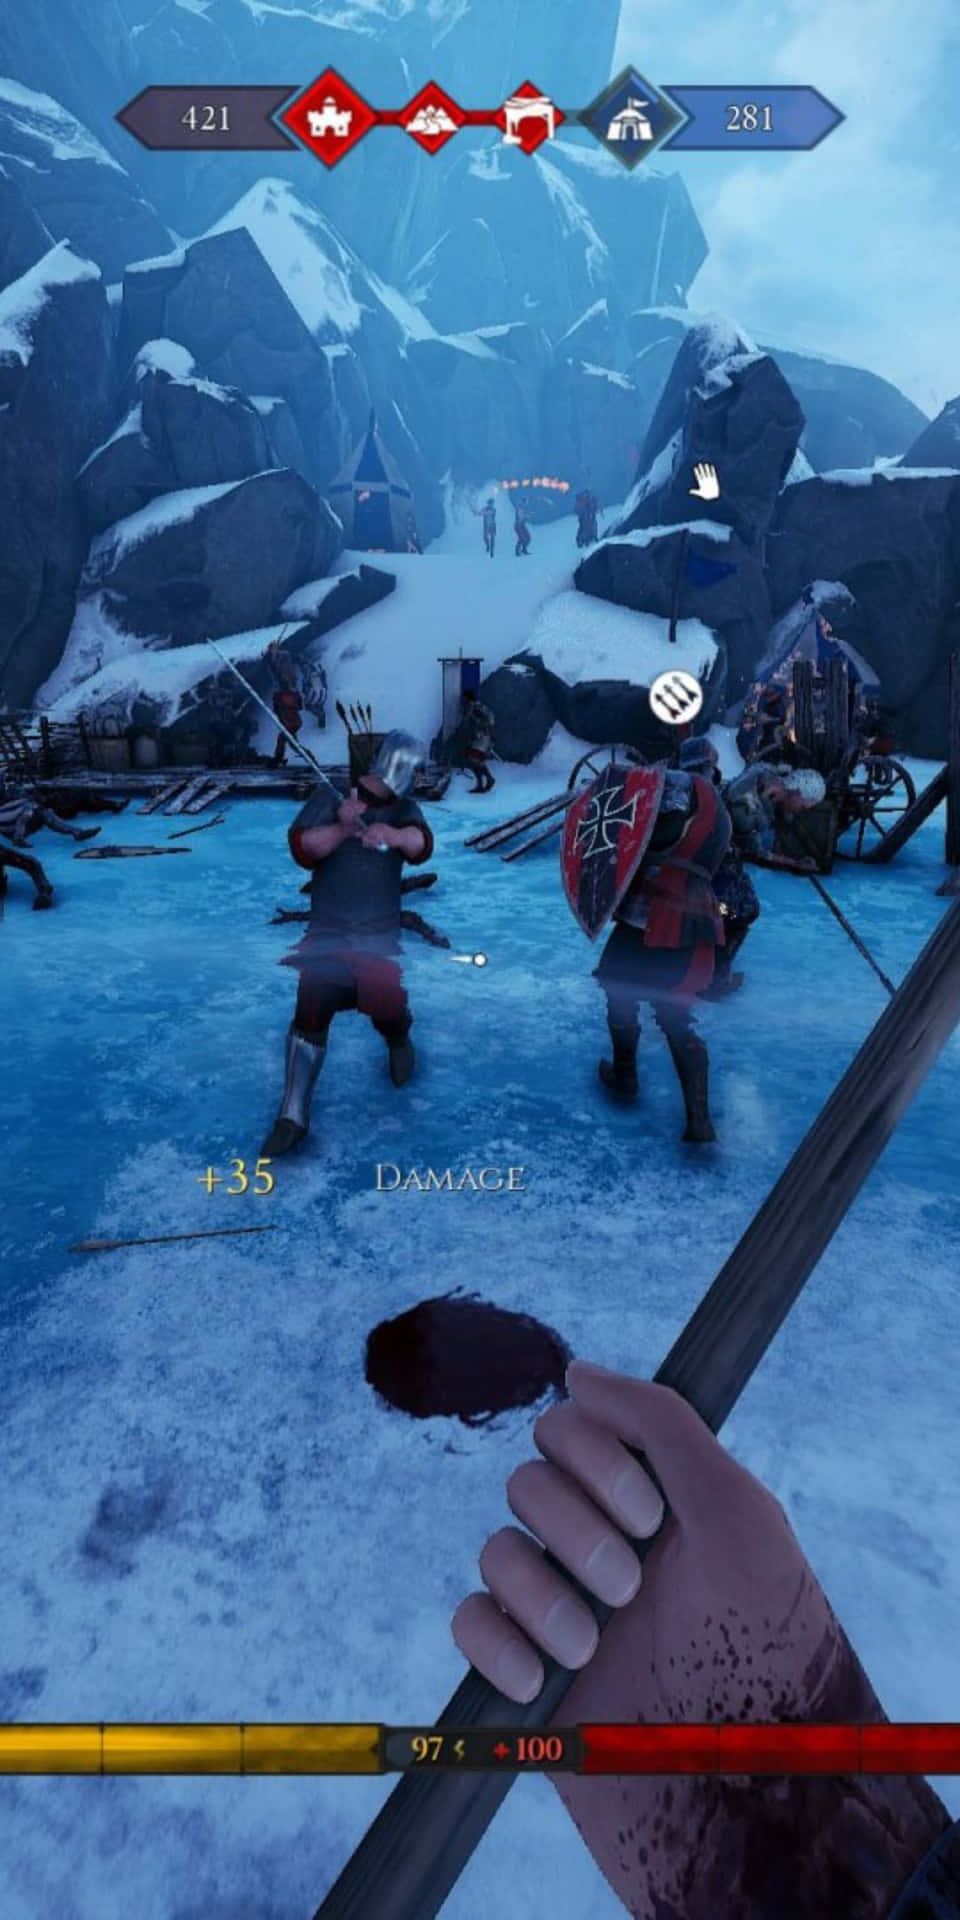 Prepare for an epic adventure with Pixel 3 Mordhau